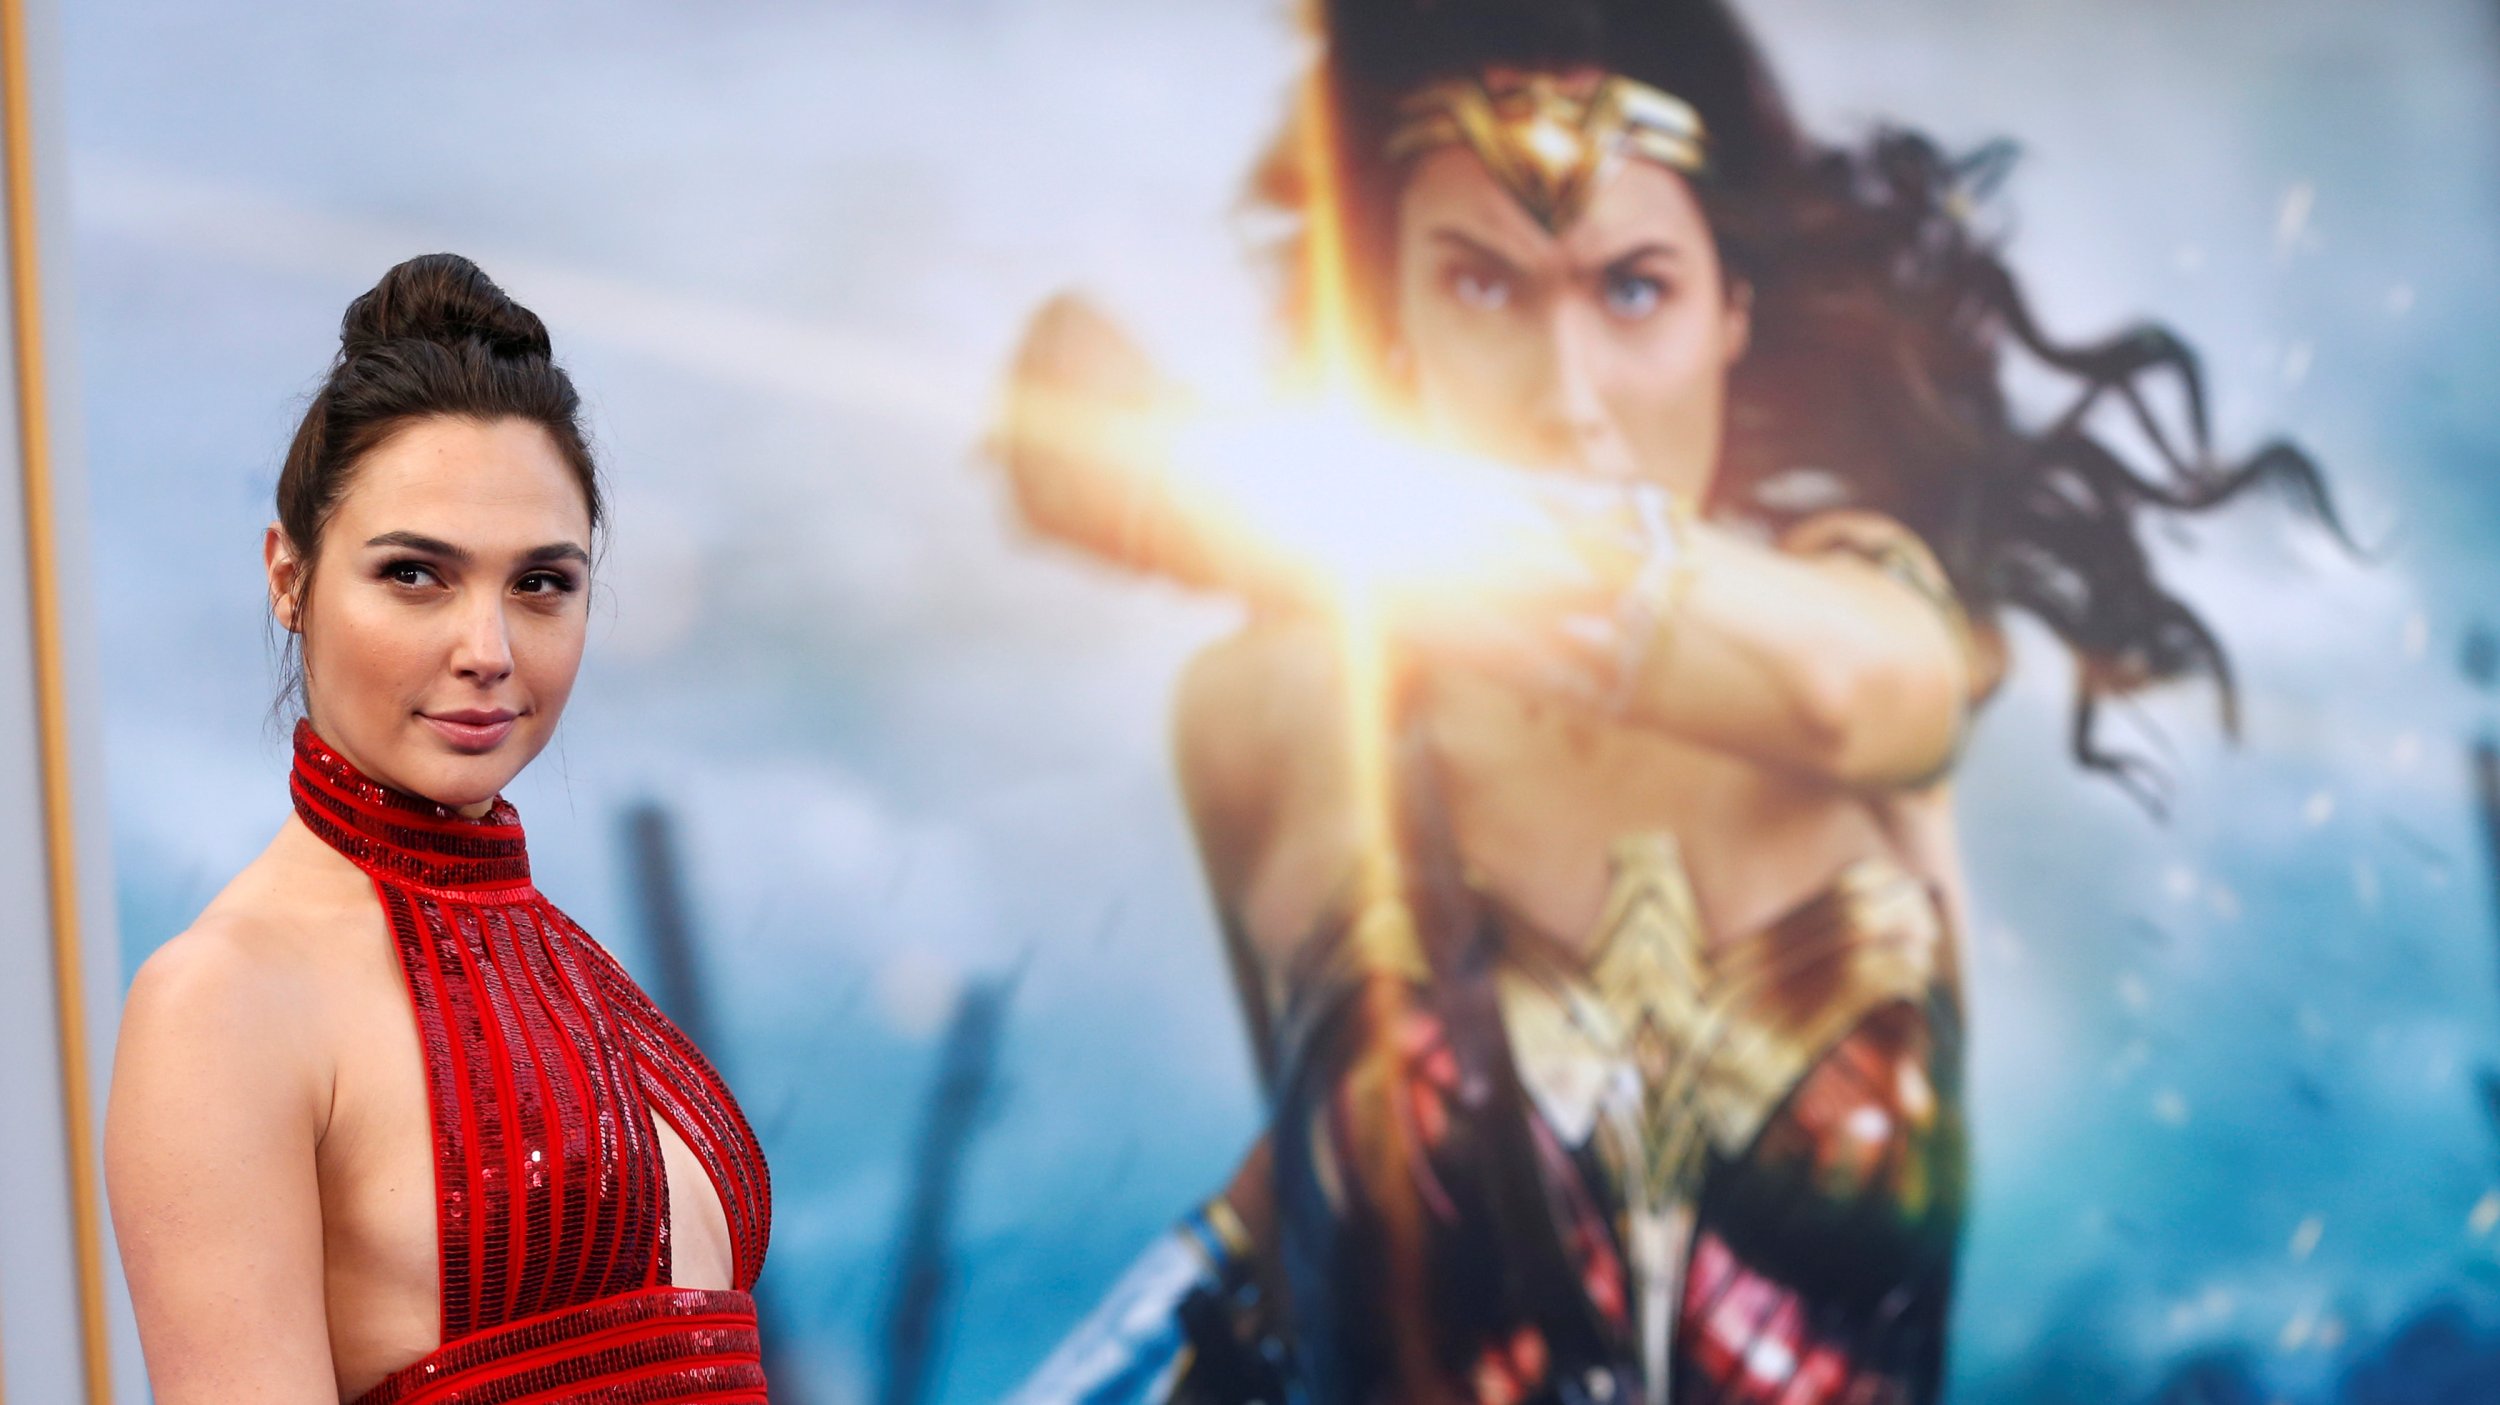 Wonder Woman kindles controversy in the Arab world